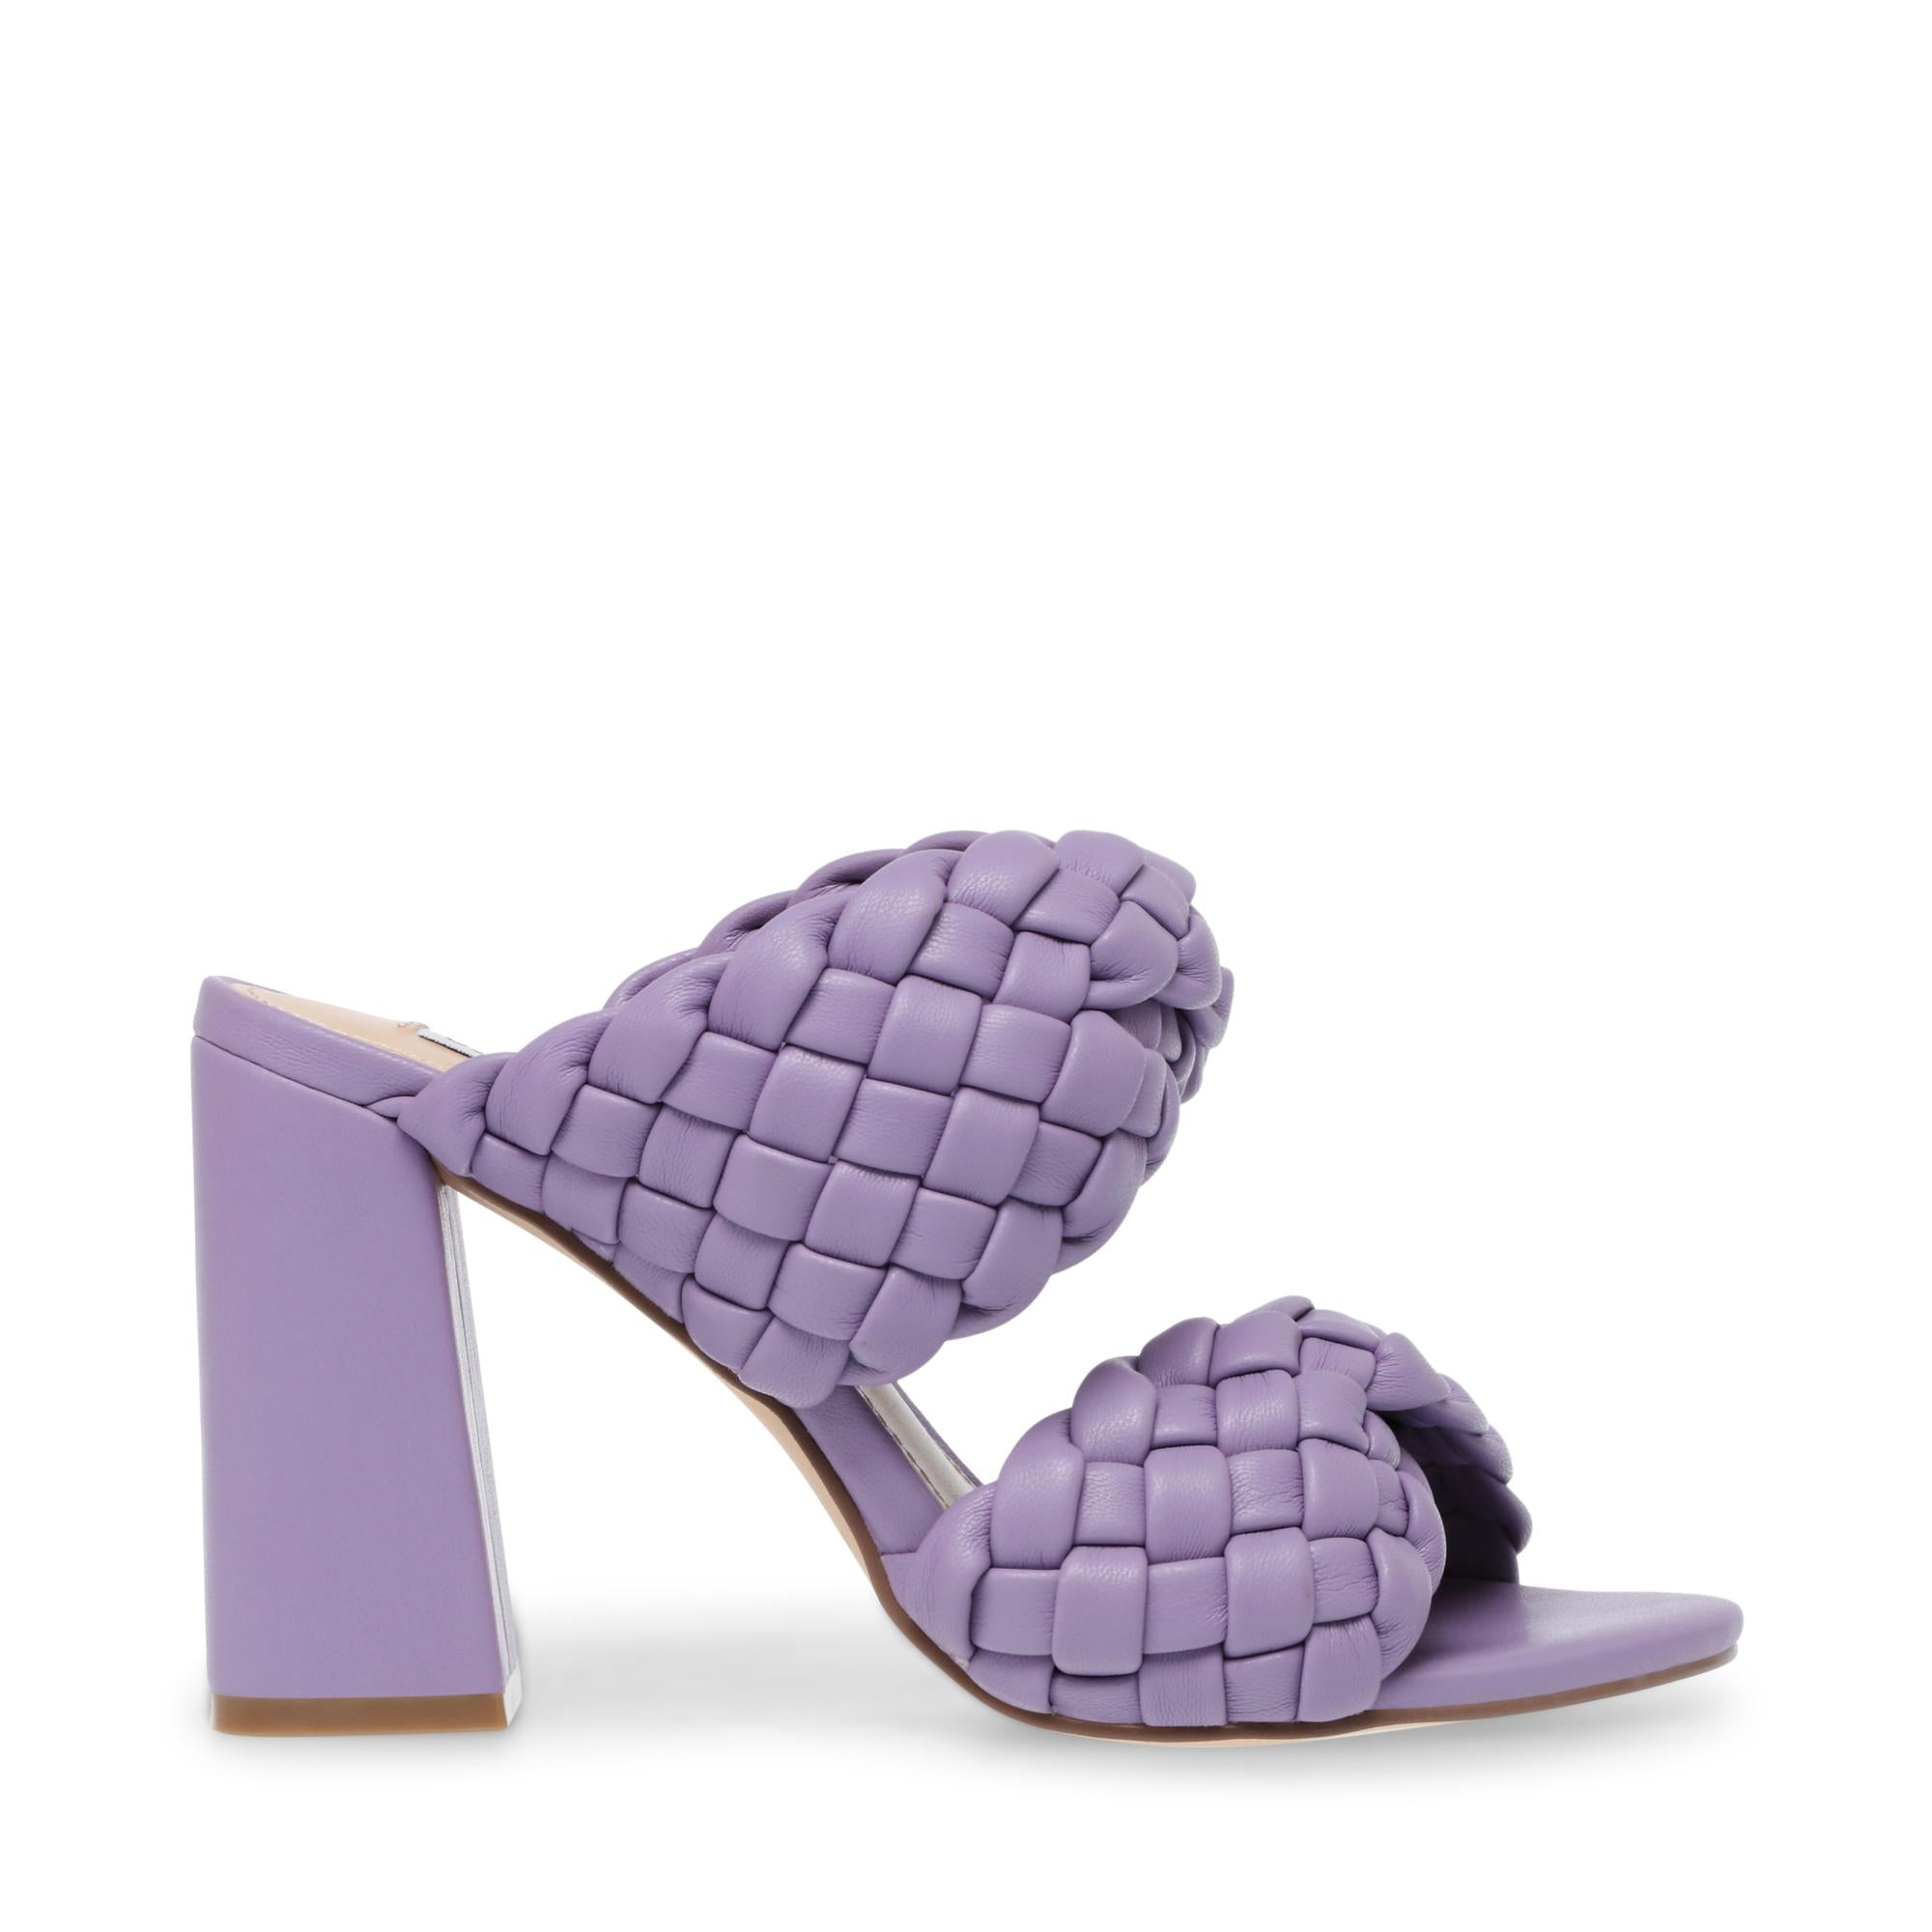 STEVE MADDEN TWISTED LILAC